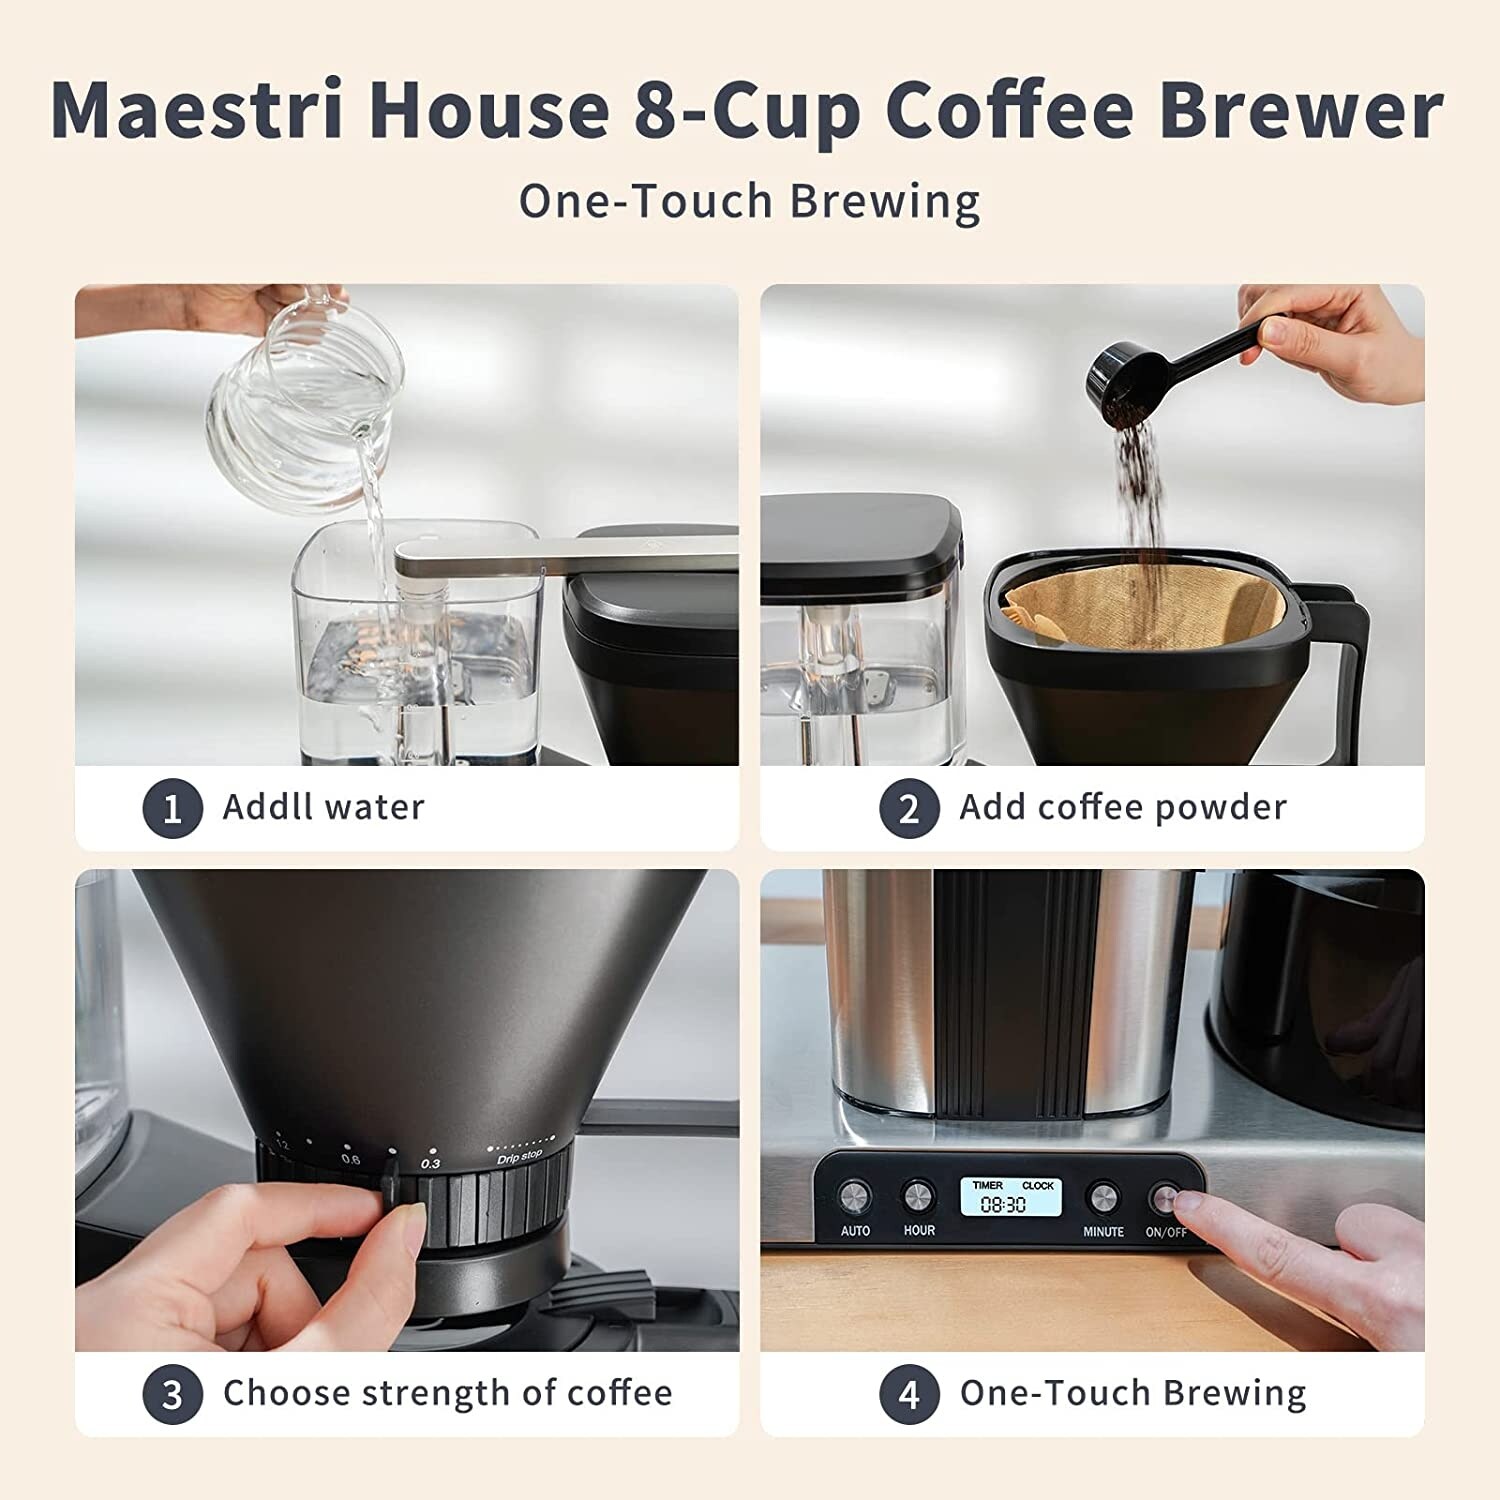 https://ak1.ostkcdn.com/images/products/is/images/direct/46cf275555c9c3525ed6491593ef6b2682bbfb02/House-Coffee-Maker%2C-8-Cup-Drip-Coffee-Machine-with-Stainless-Steel%2C-One-Touch-Brewing-and-Adjustable-Strength.jpg